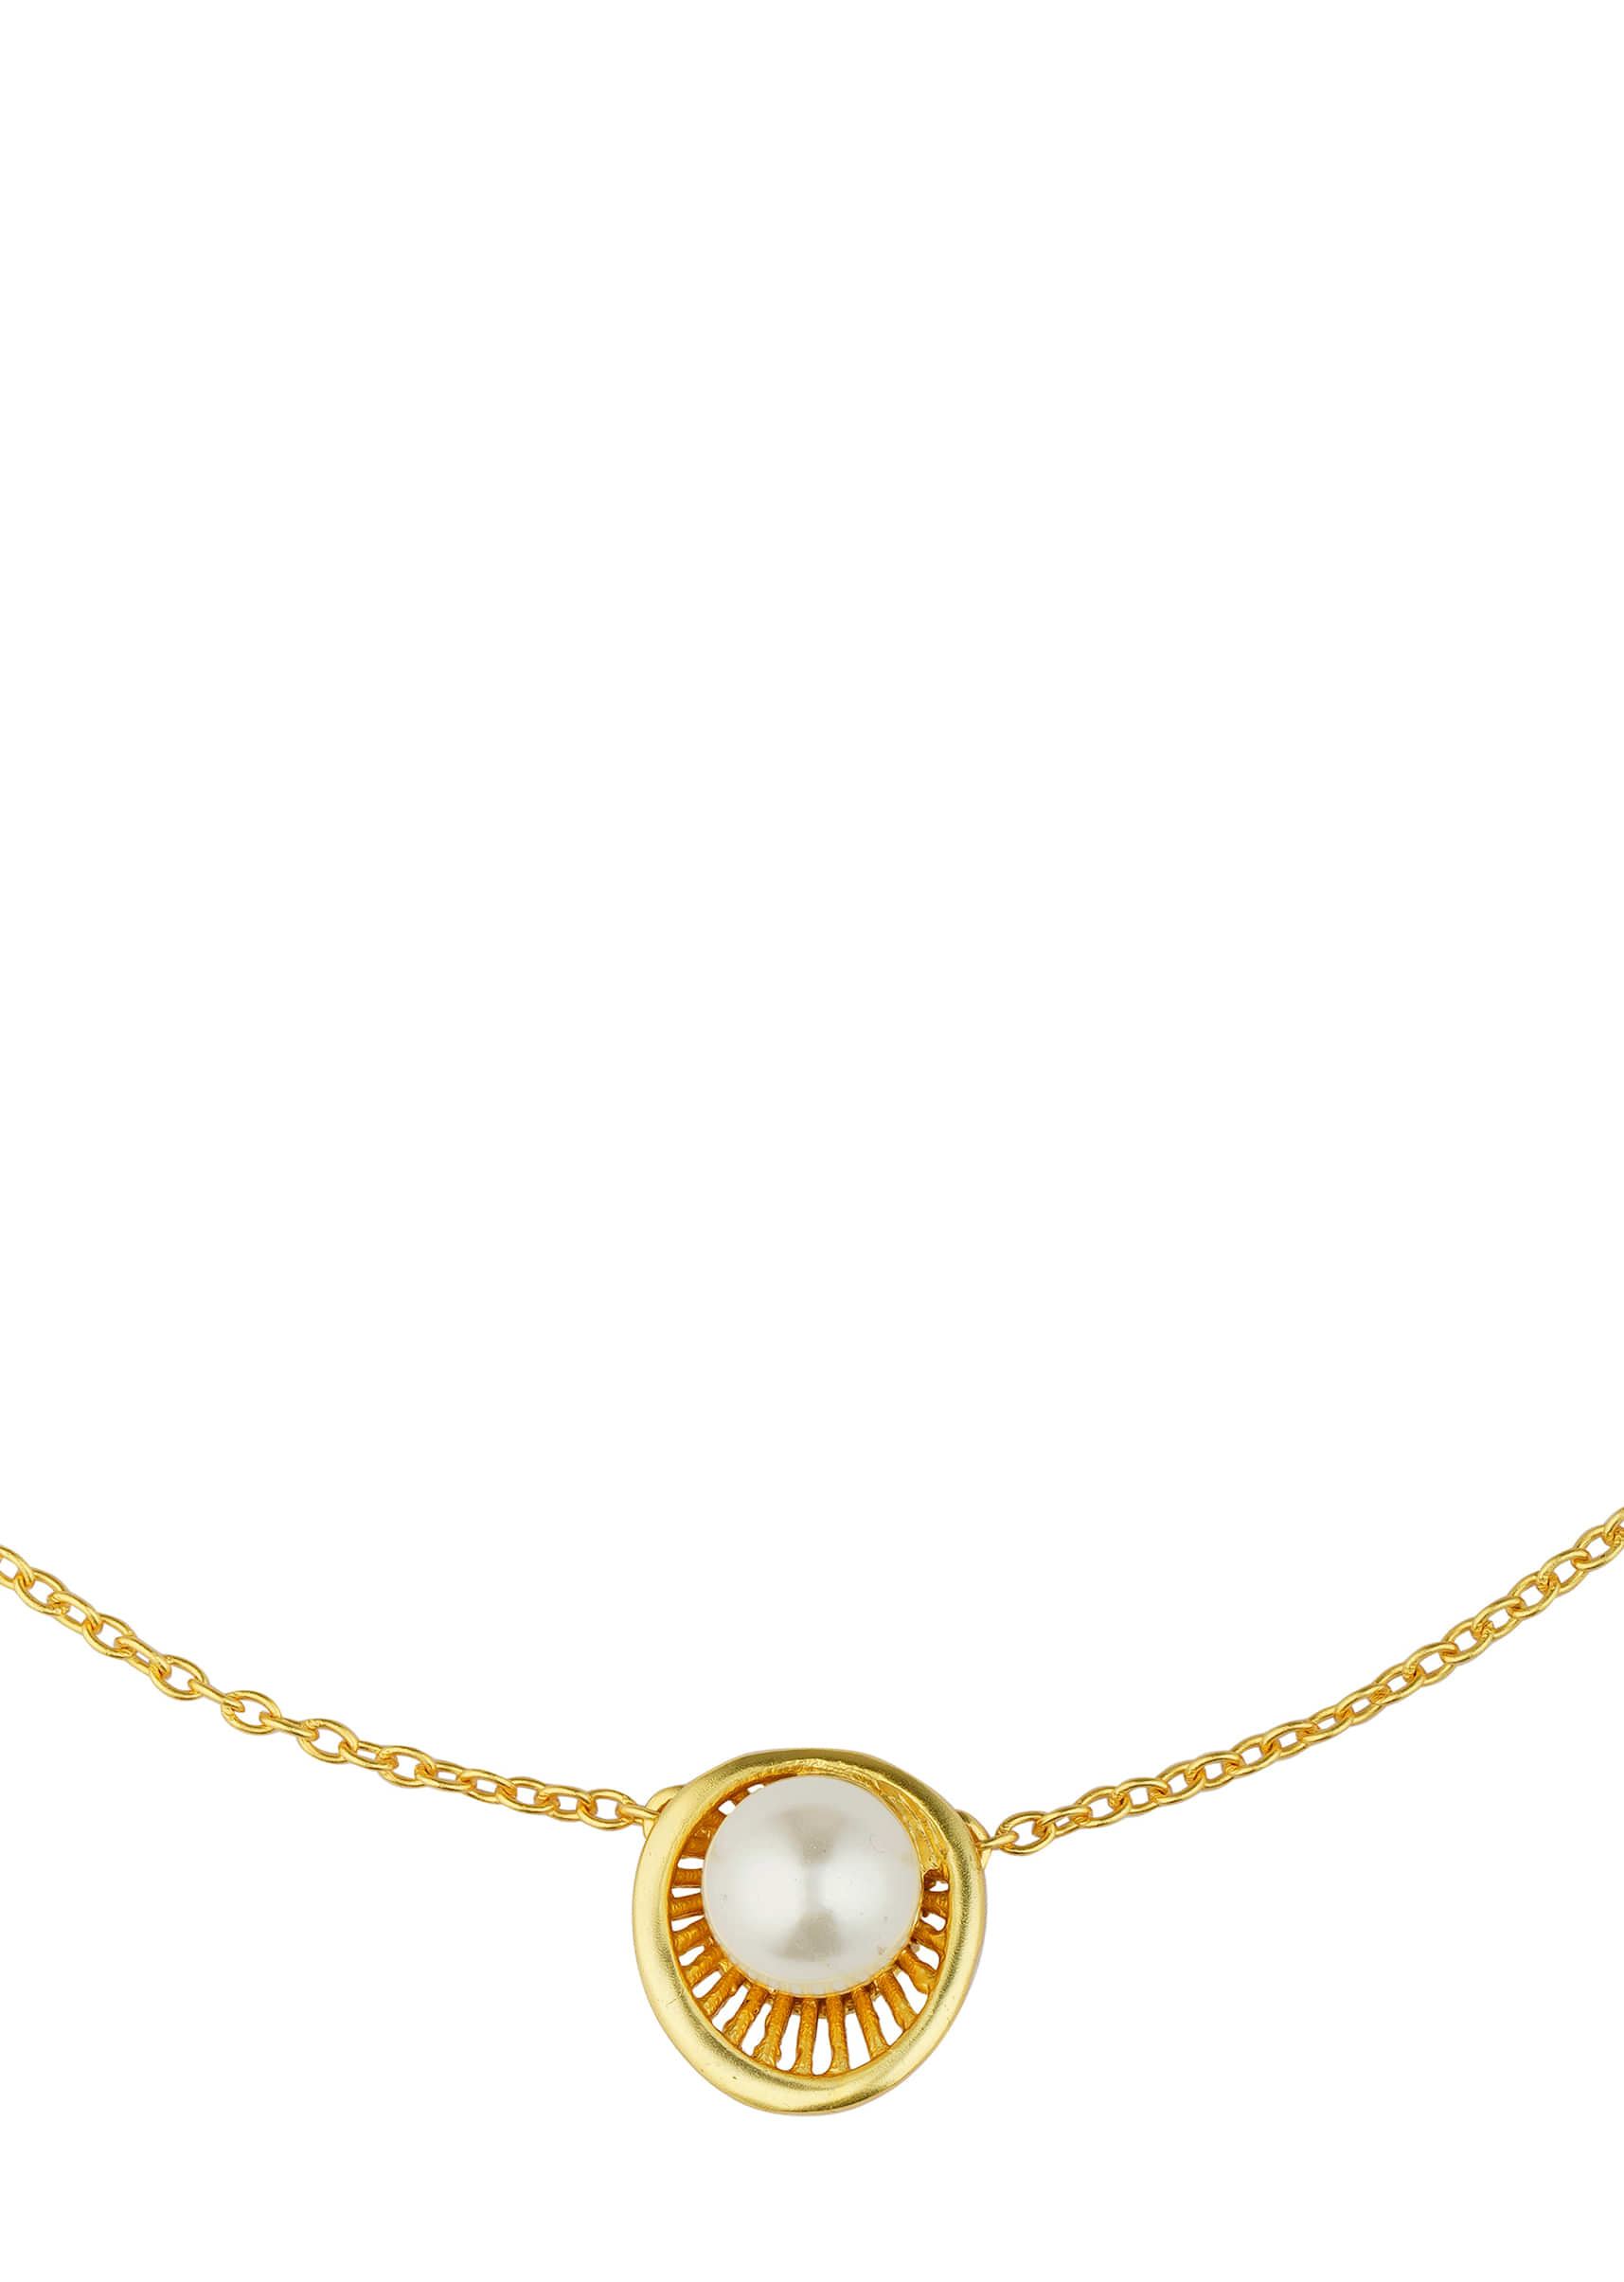 Gold 22K Necklace With White Shell Pearl Pendant 